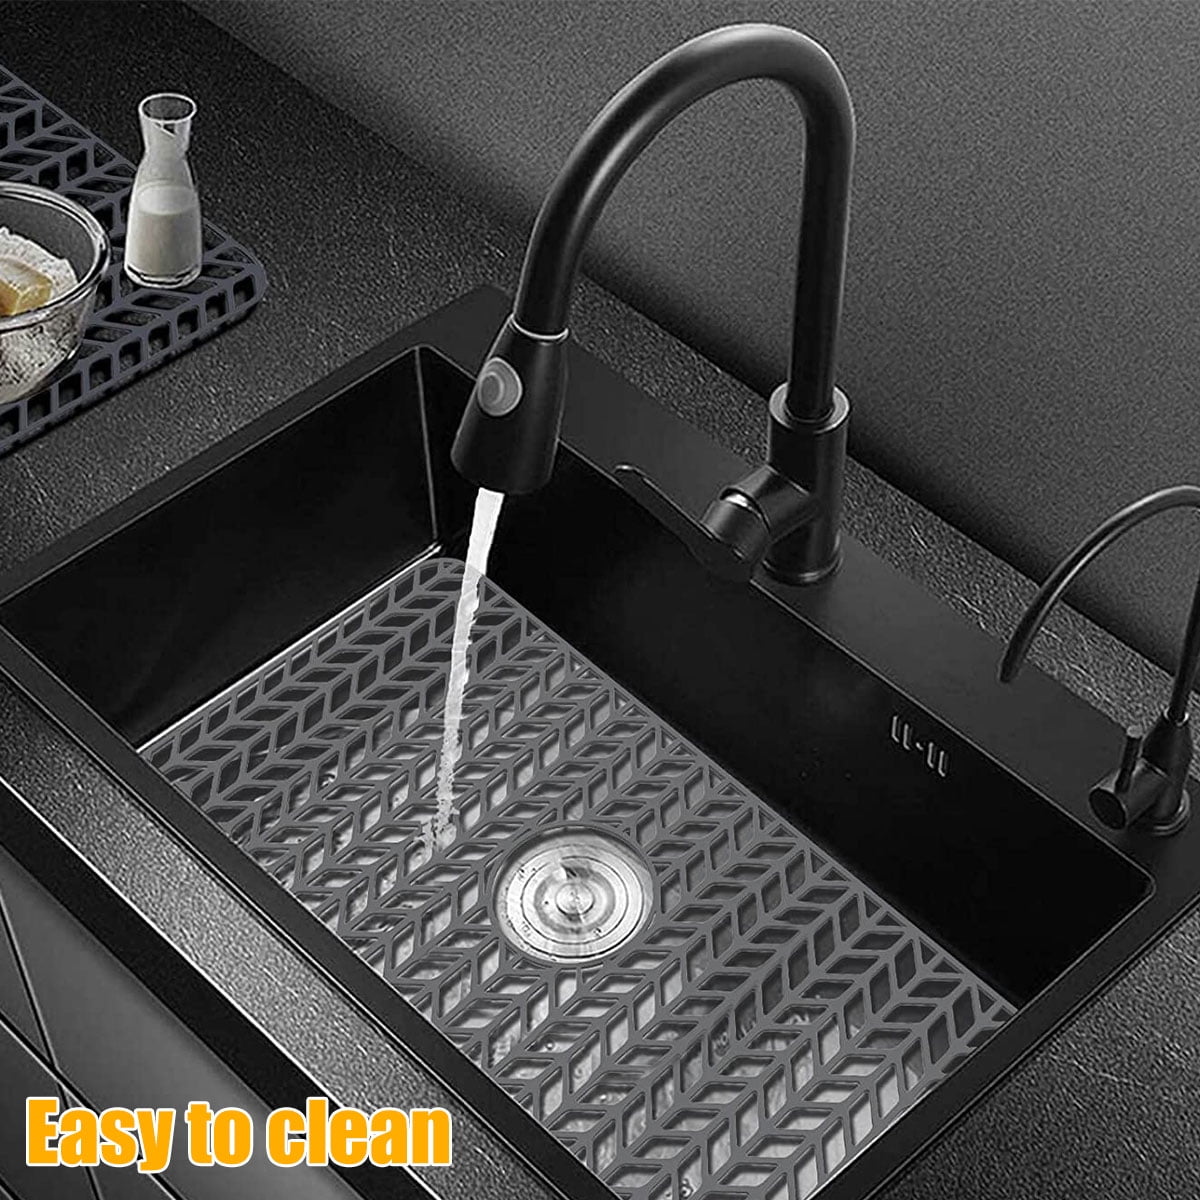 MONVIE Bathroom Sink Cover for Counter Space, Heat-Resistant Silicone  Makeup Brush Cleaner Mat, Foldable Sink Covers with Hanging Loop, Space  Saver